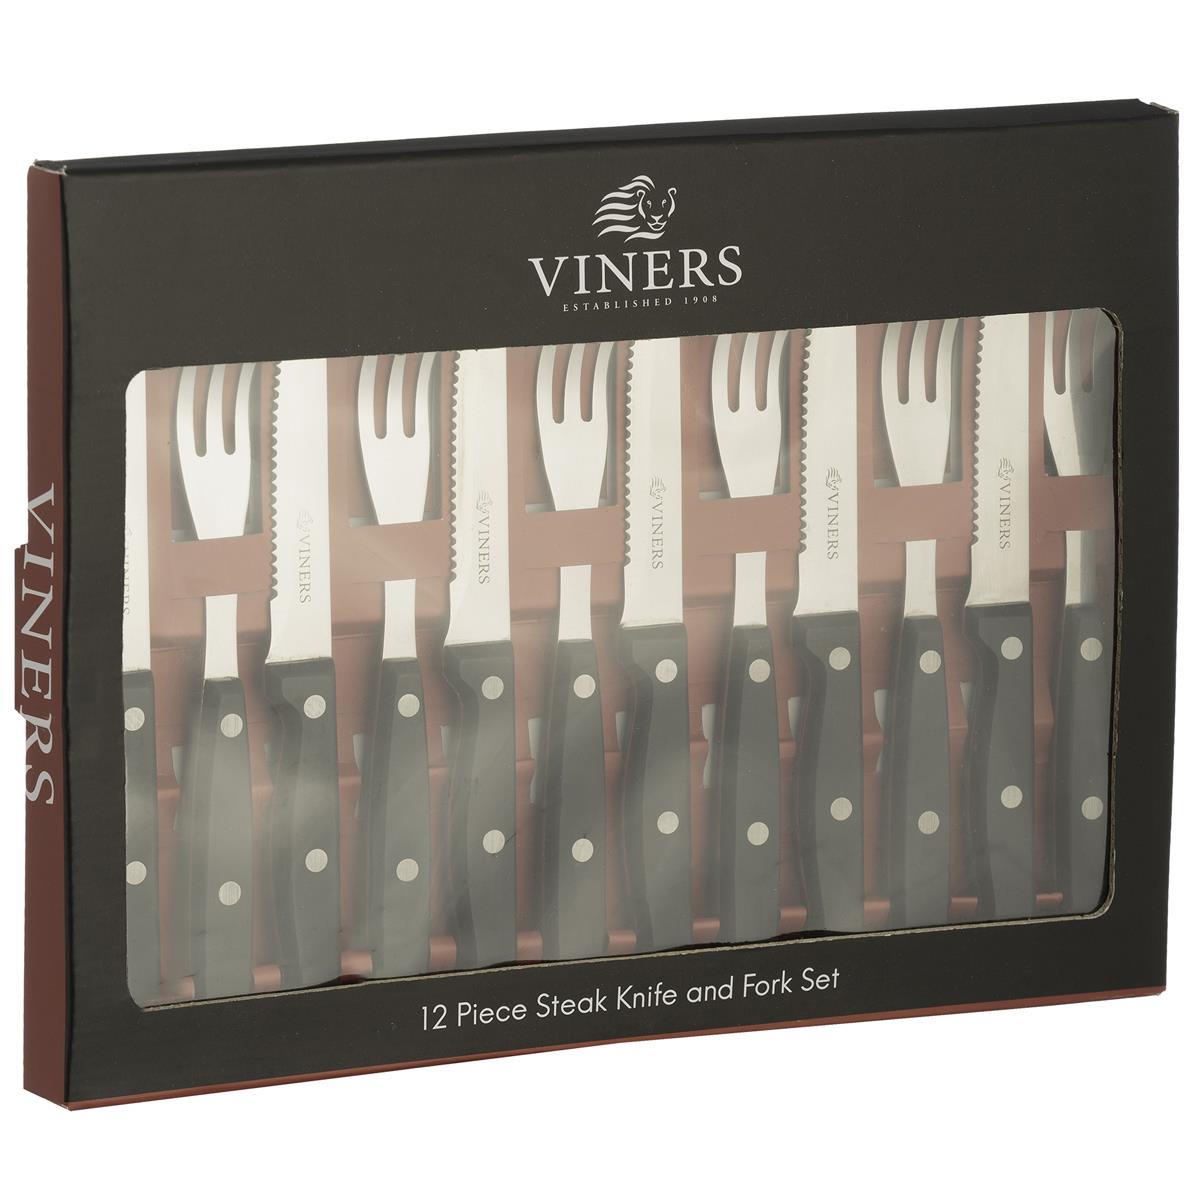 Viners 12 Piece Steak Knife & Fork Set Questions & Answers